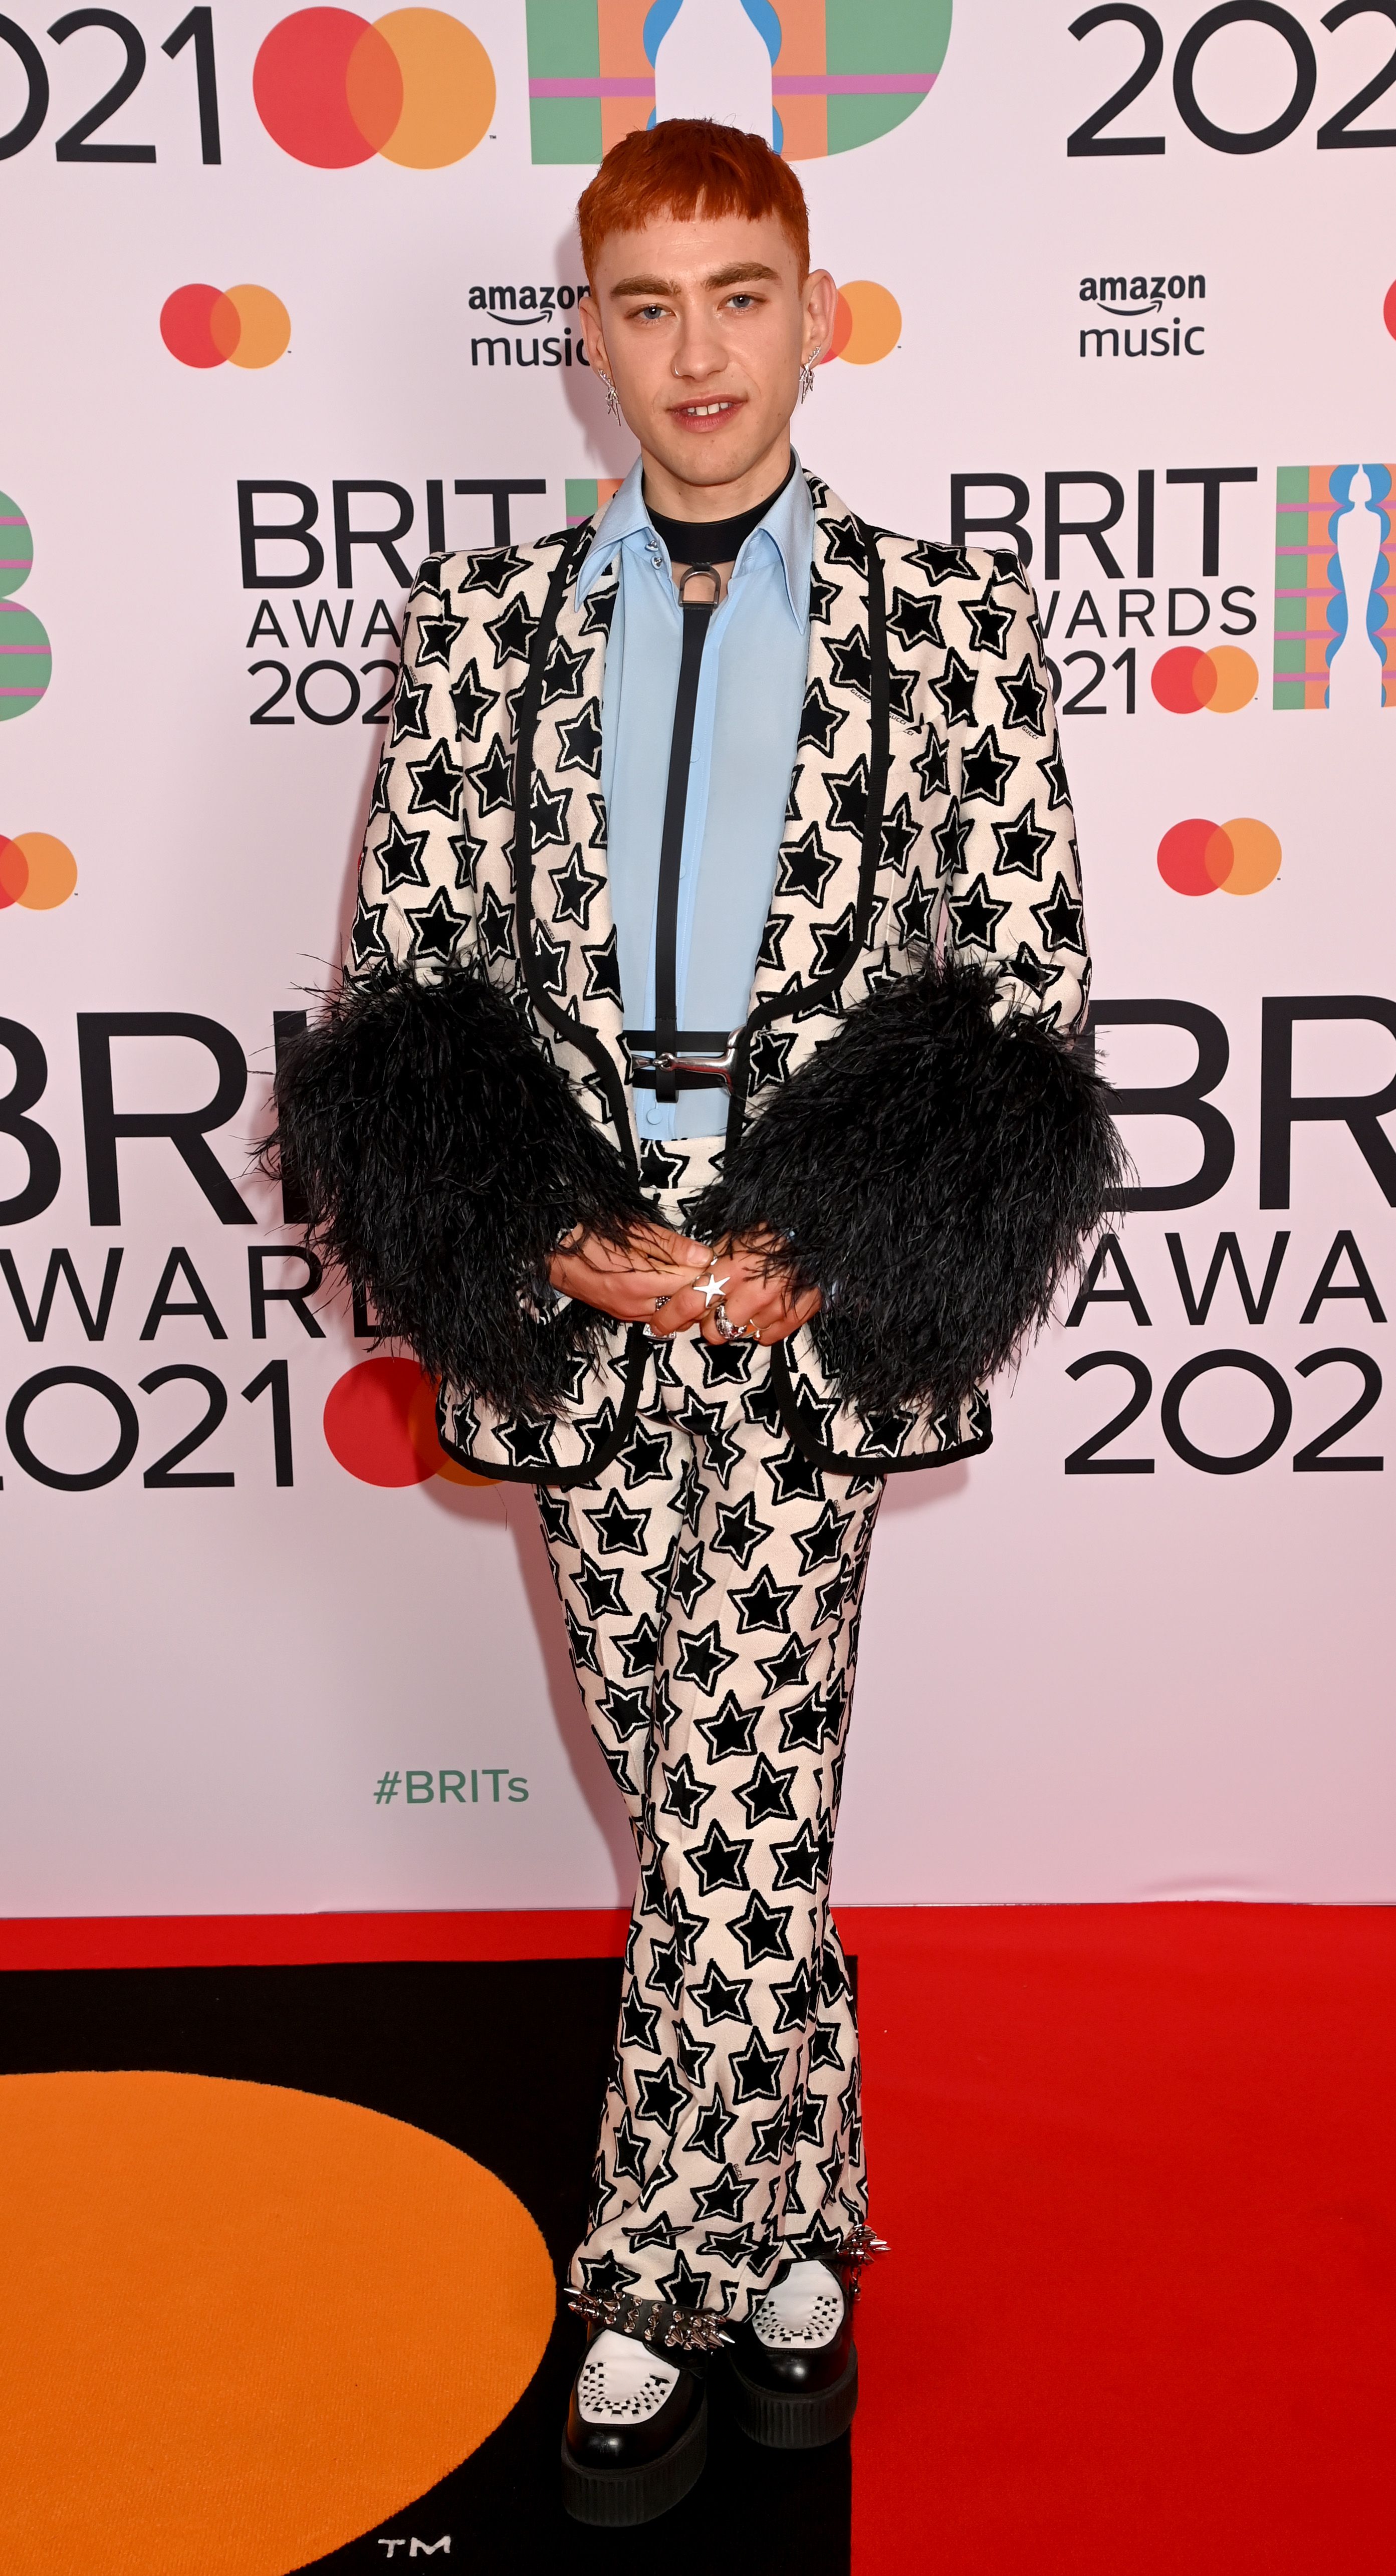 Harry Styles in Gucci at the 2020 Brit Awards